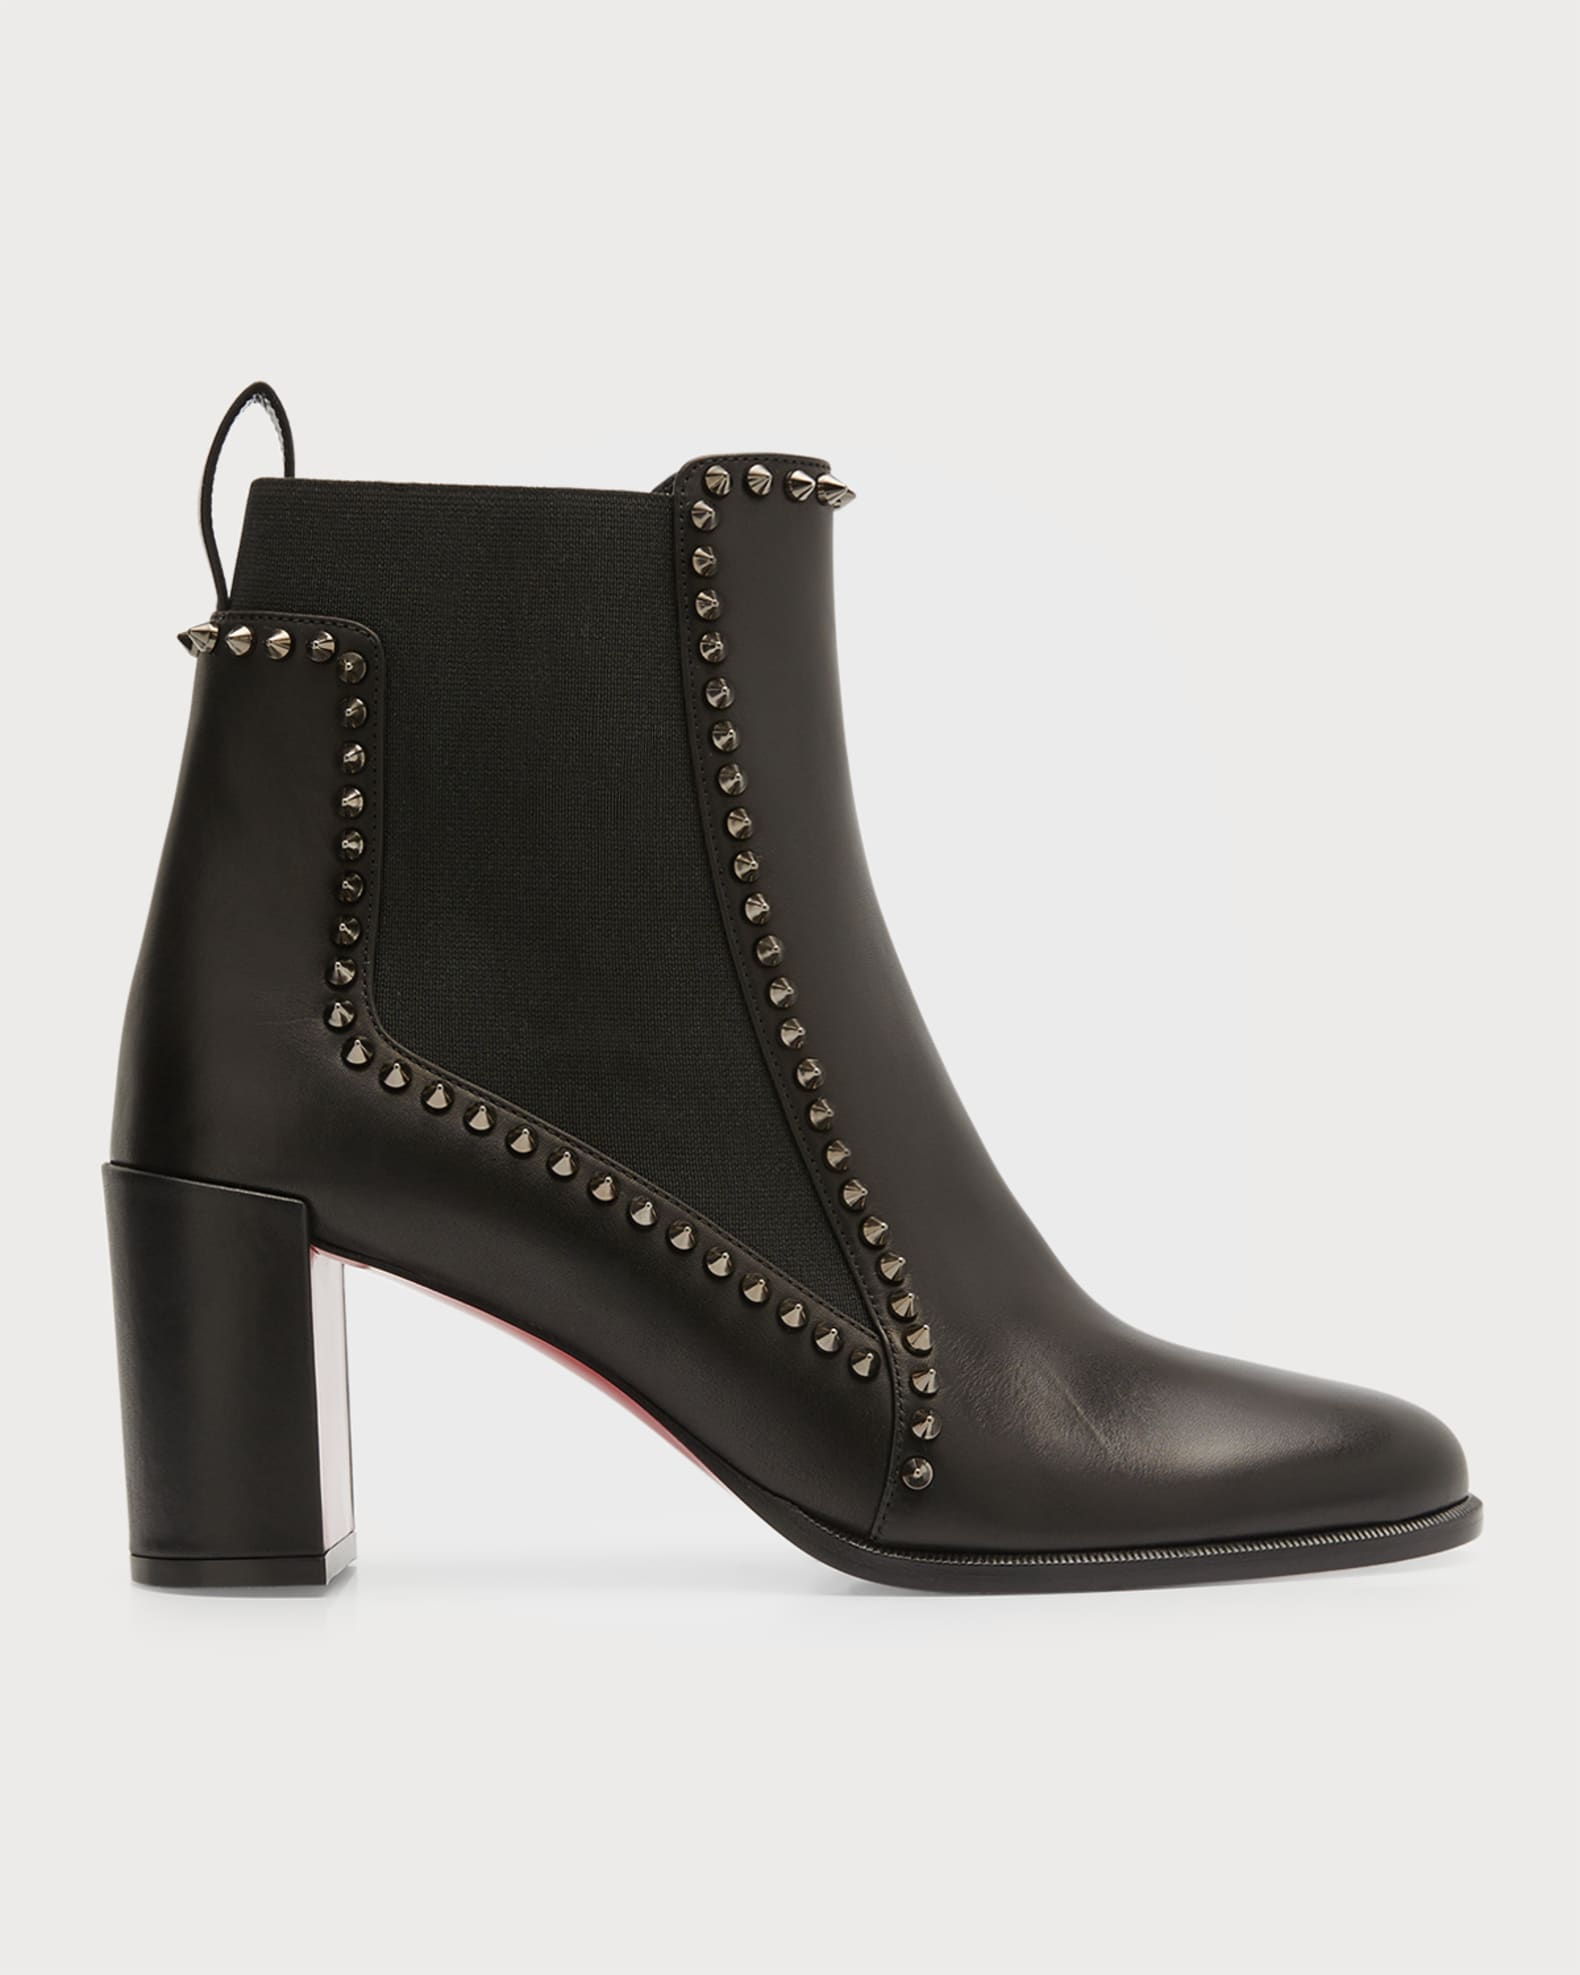 Christian Louboutin Outline Spikes Red Sole Chelsea Booties | Neiman Marcus